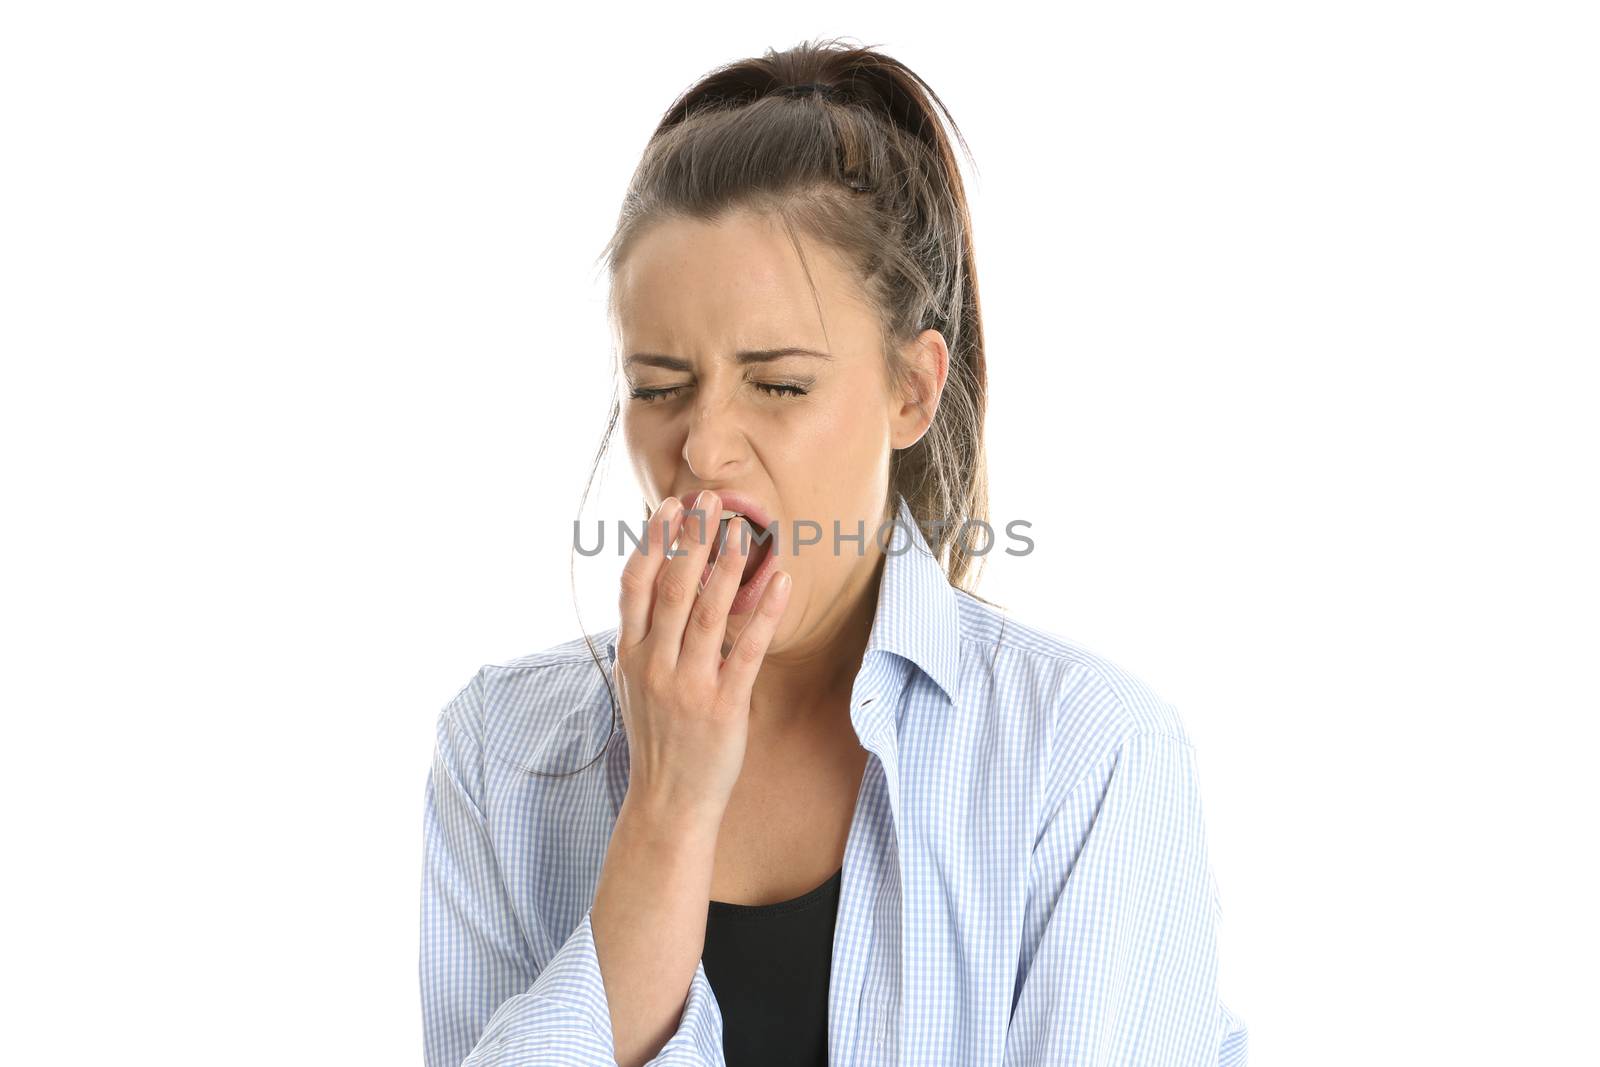 Model Released. Woman Yawning by Whiteboxmedia